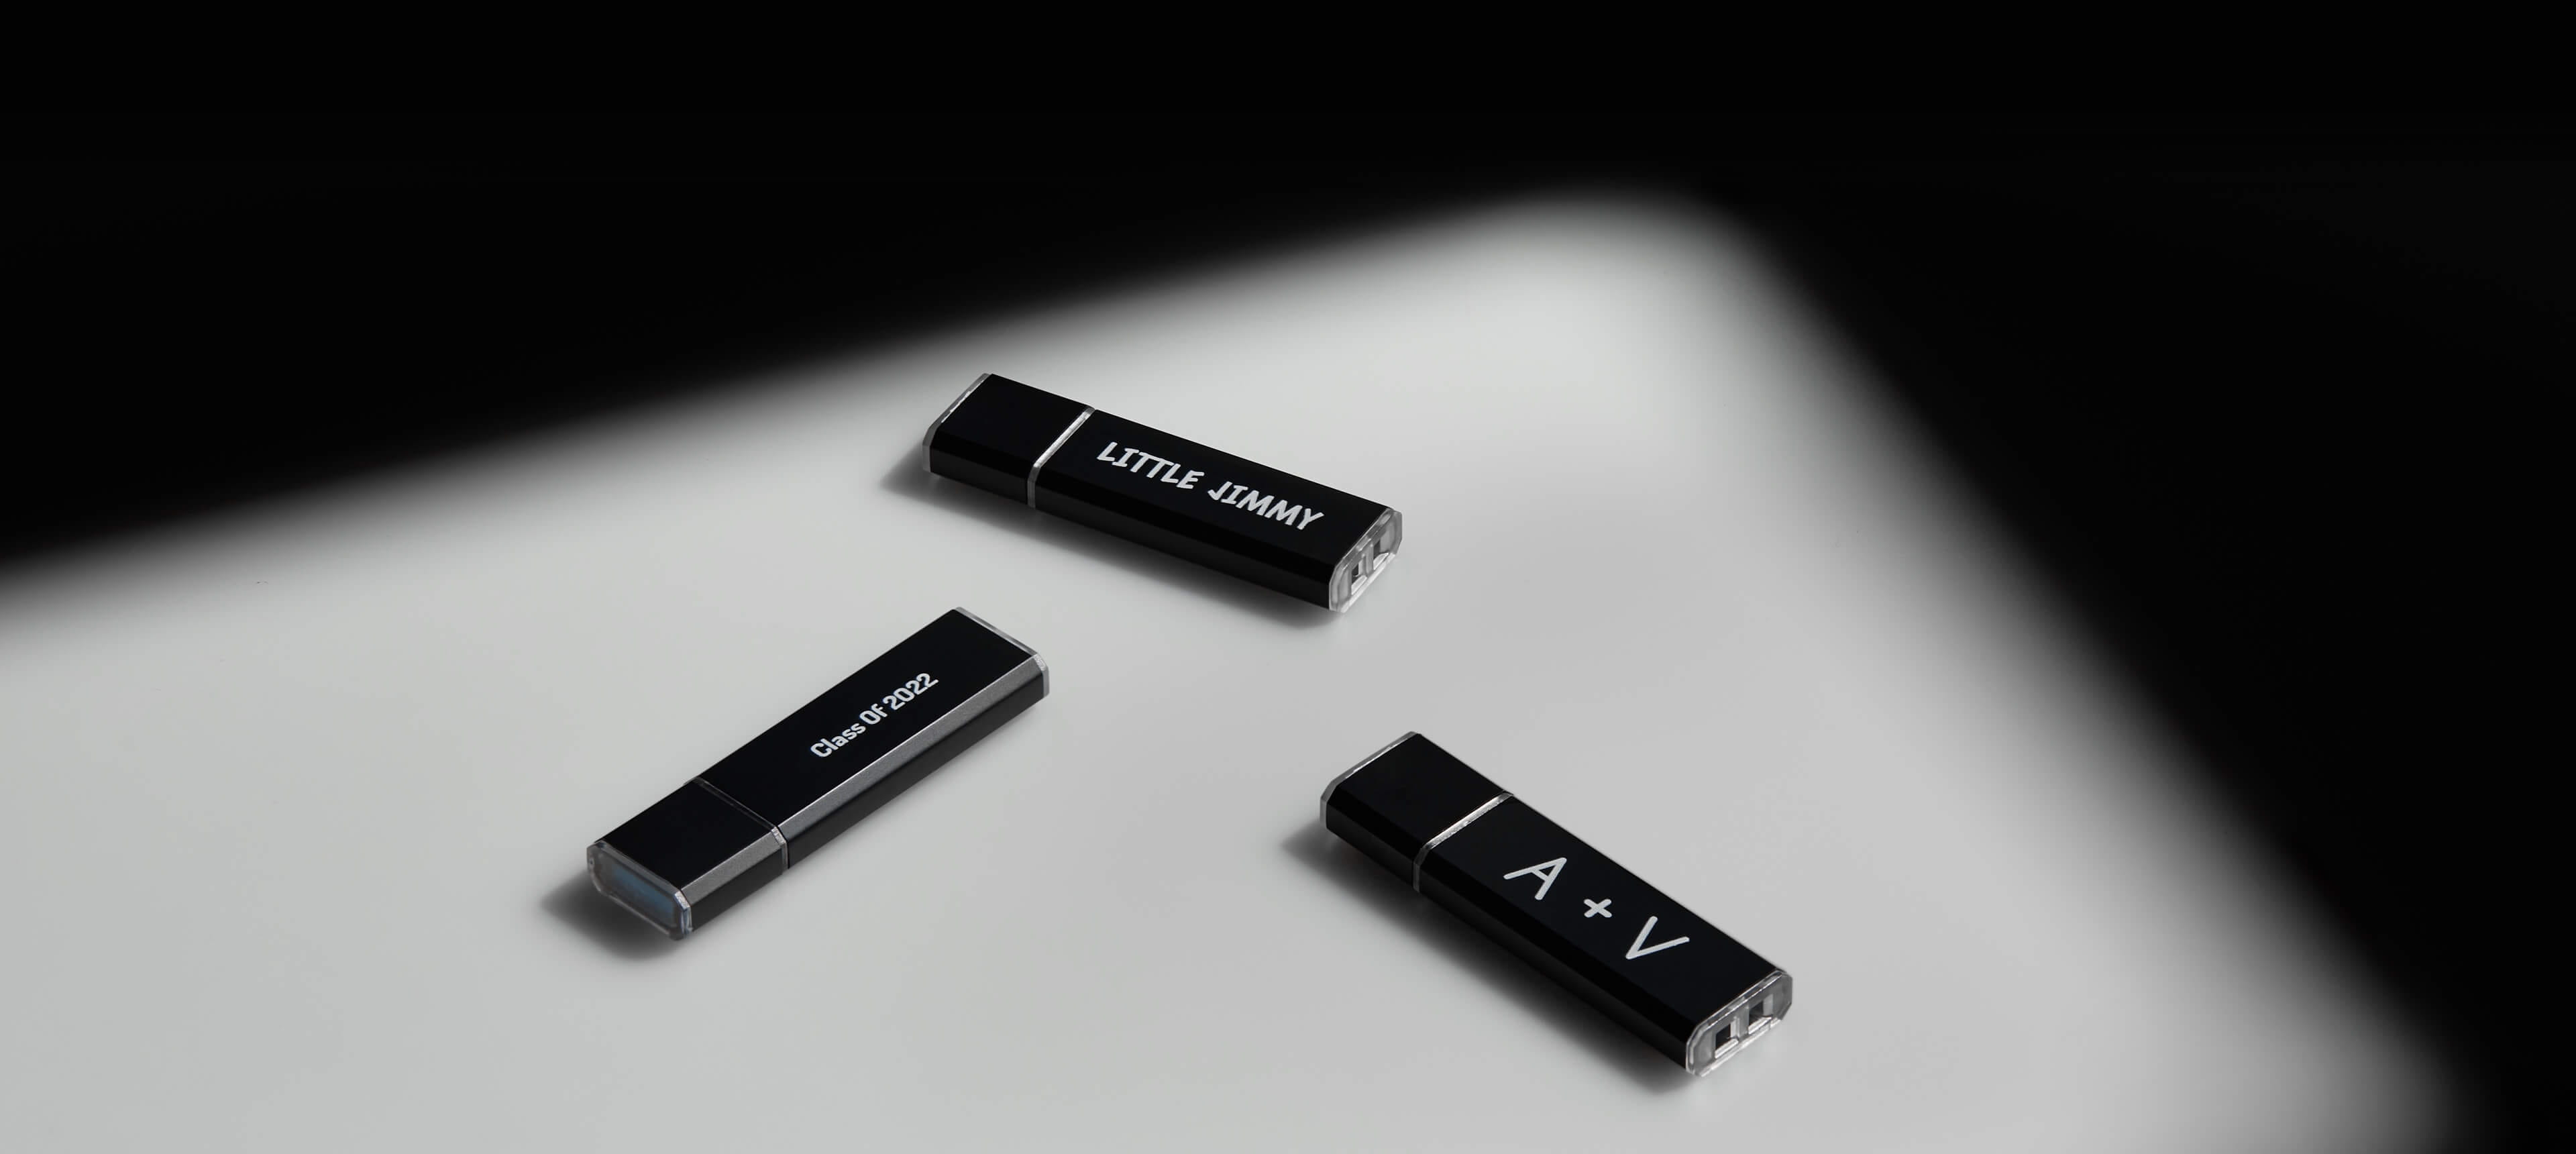 three metal usb drives with different printed text on a white table